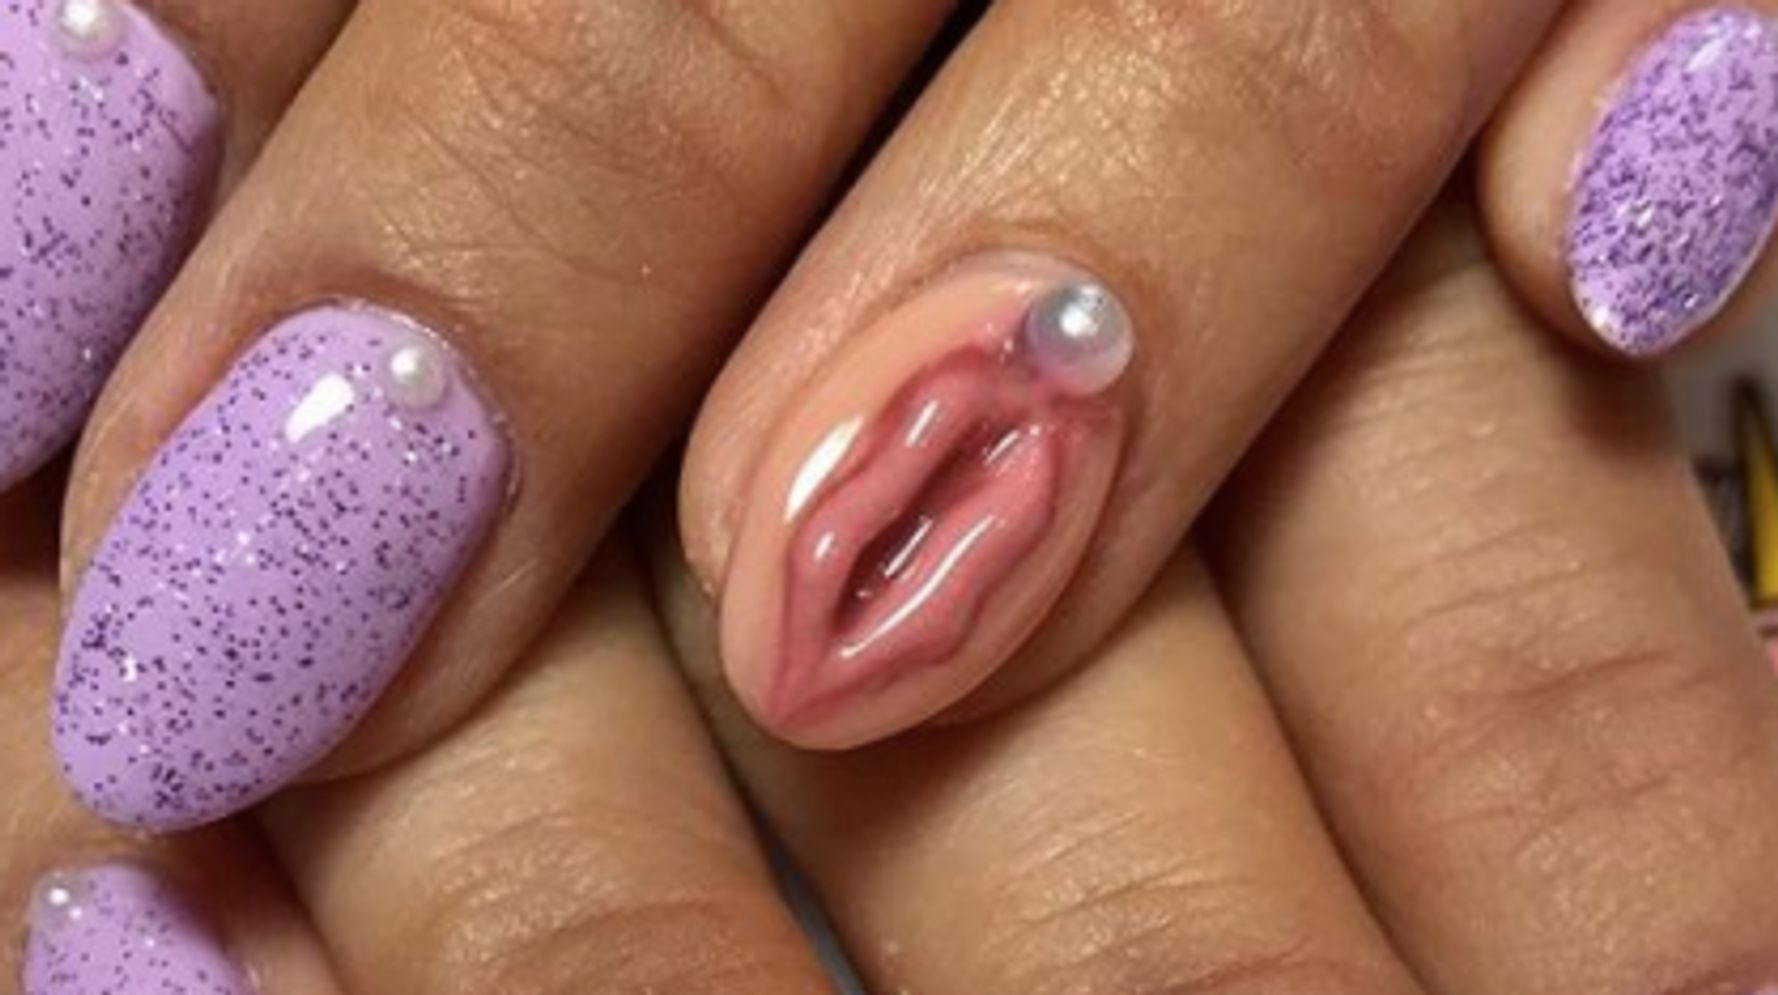 This Vagina Nail Art Is Perfect For When The Patriarchy's Got You Down | HuffPost Life